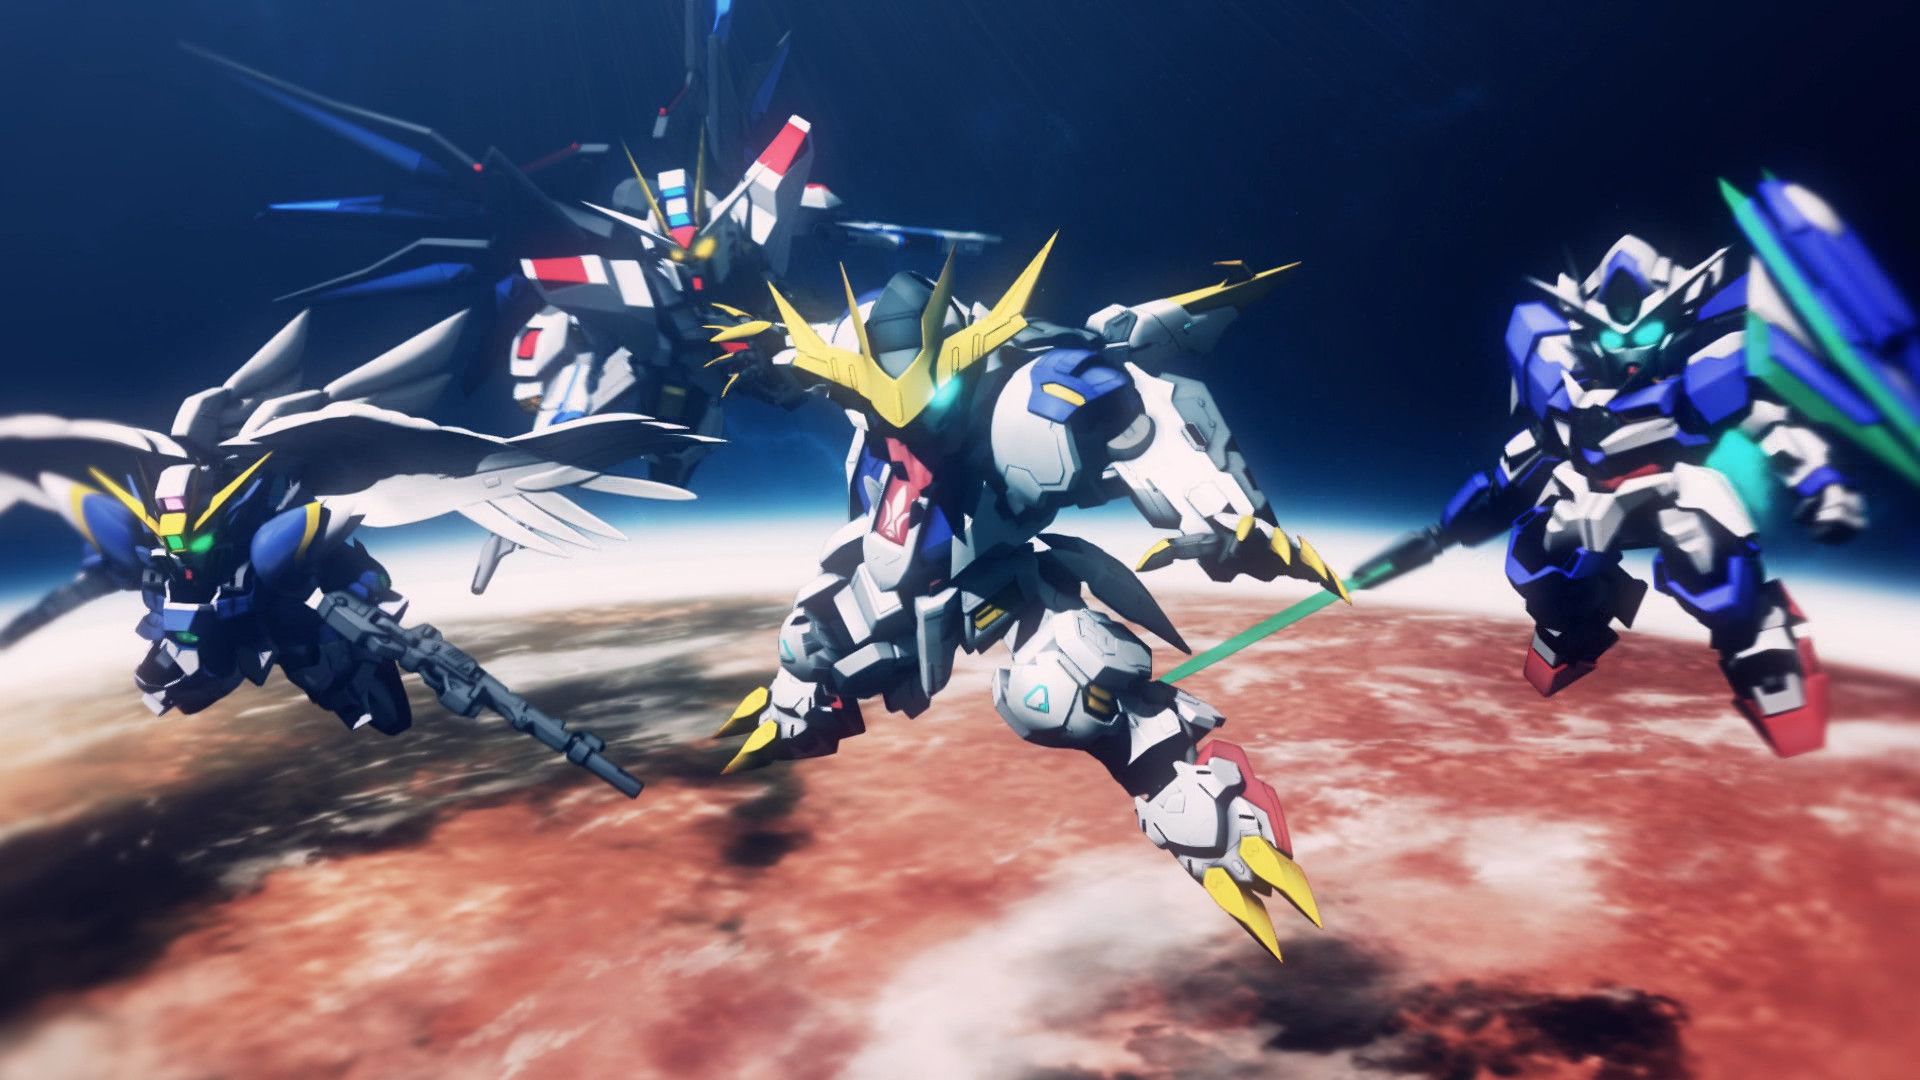 Want to check out the demo for SD Gundam G Generation Cross Rays? Here's how